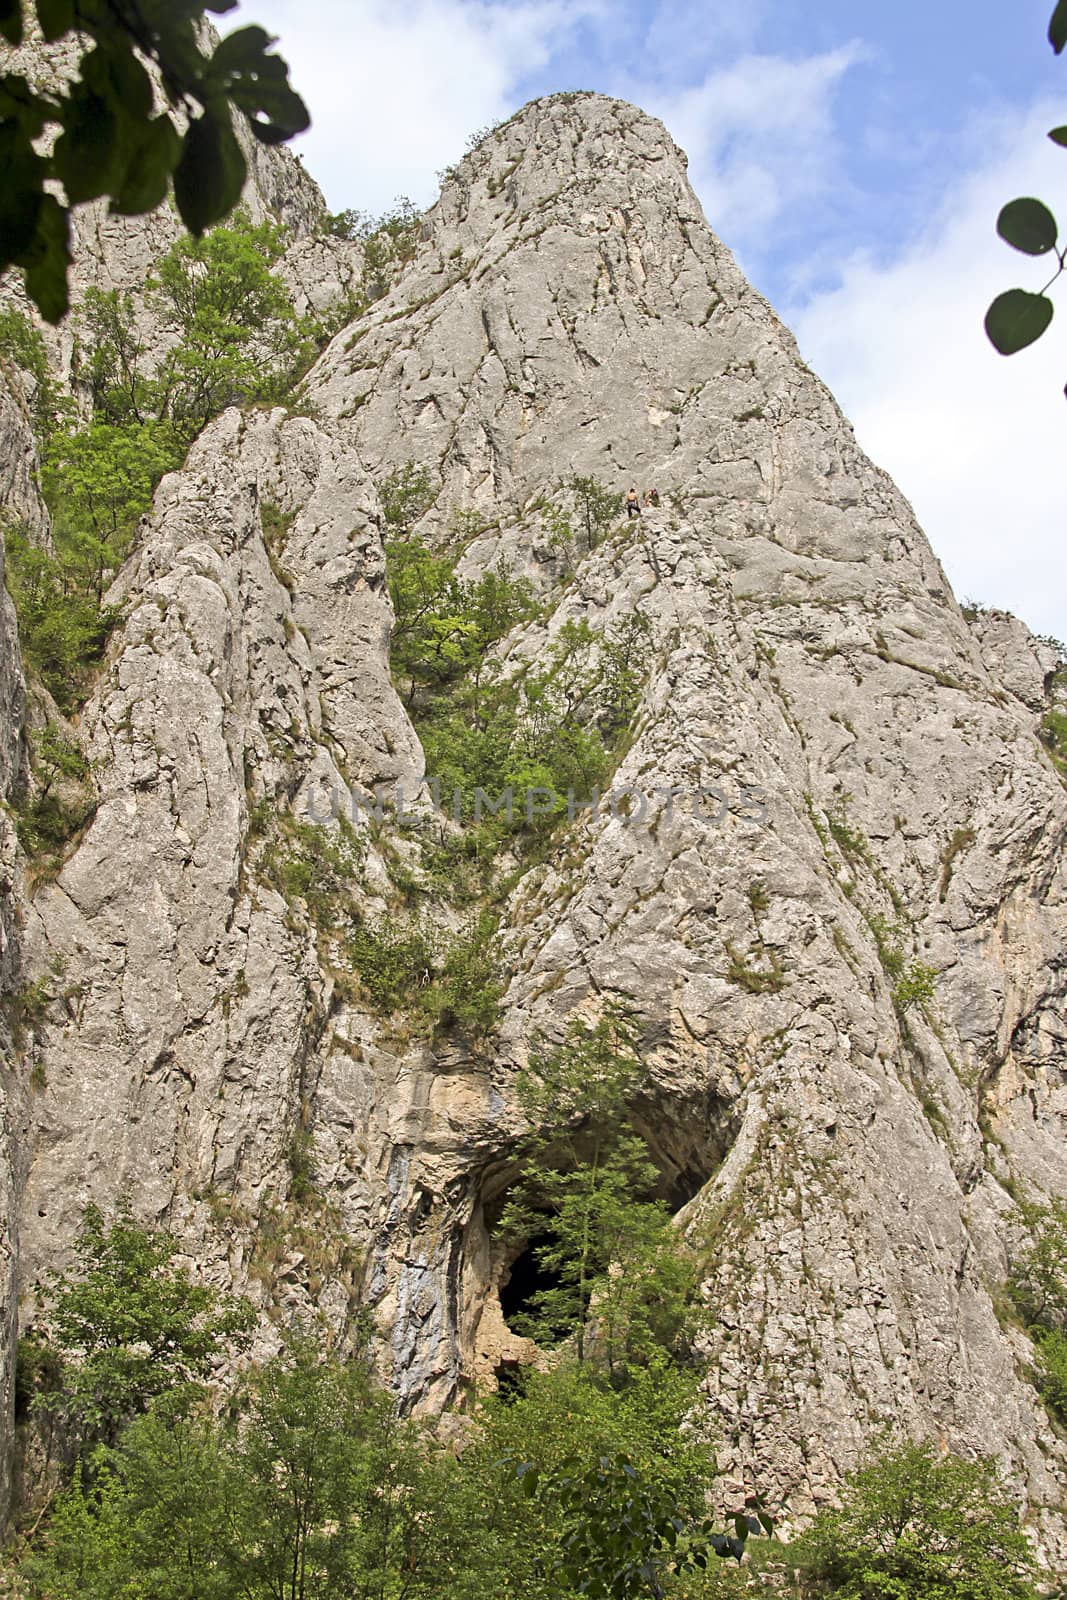 Entrance of the cave Balika in the Turda Gorges